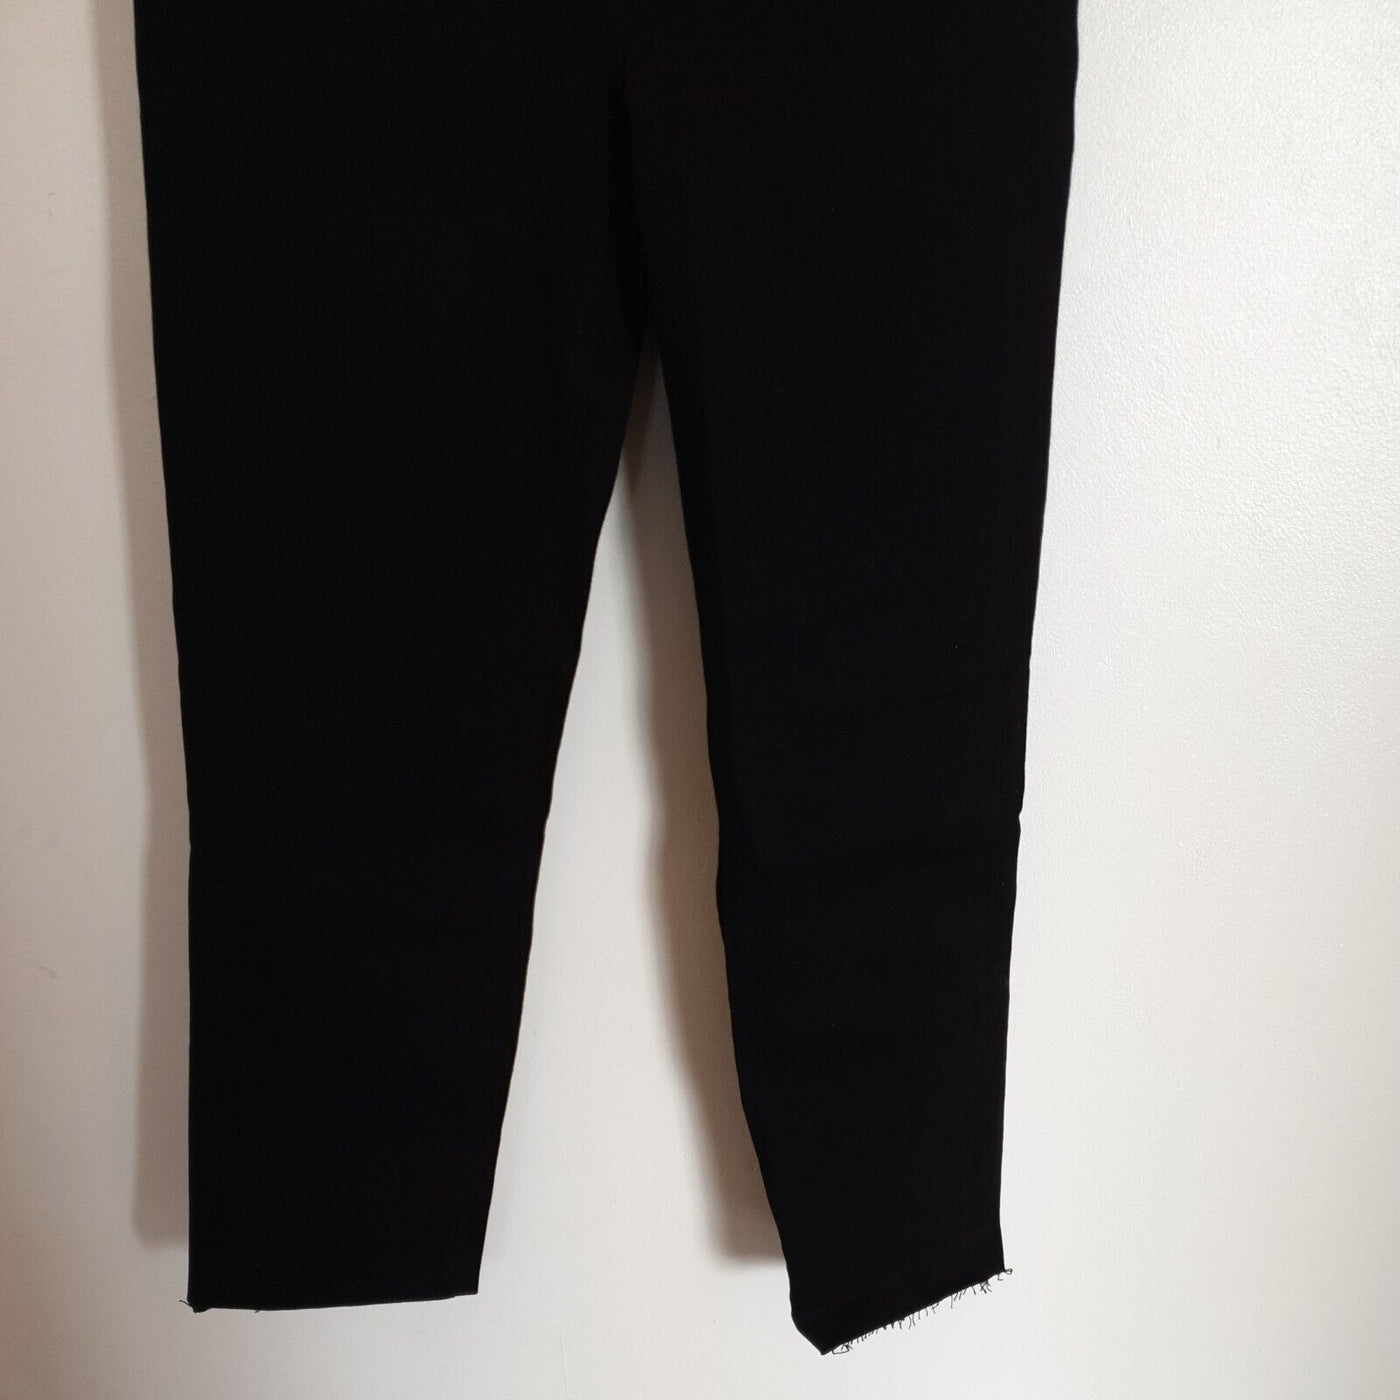 For All Mankind Black Jeans Straight Crop Size 26****Ref V109